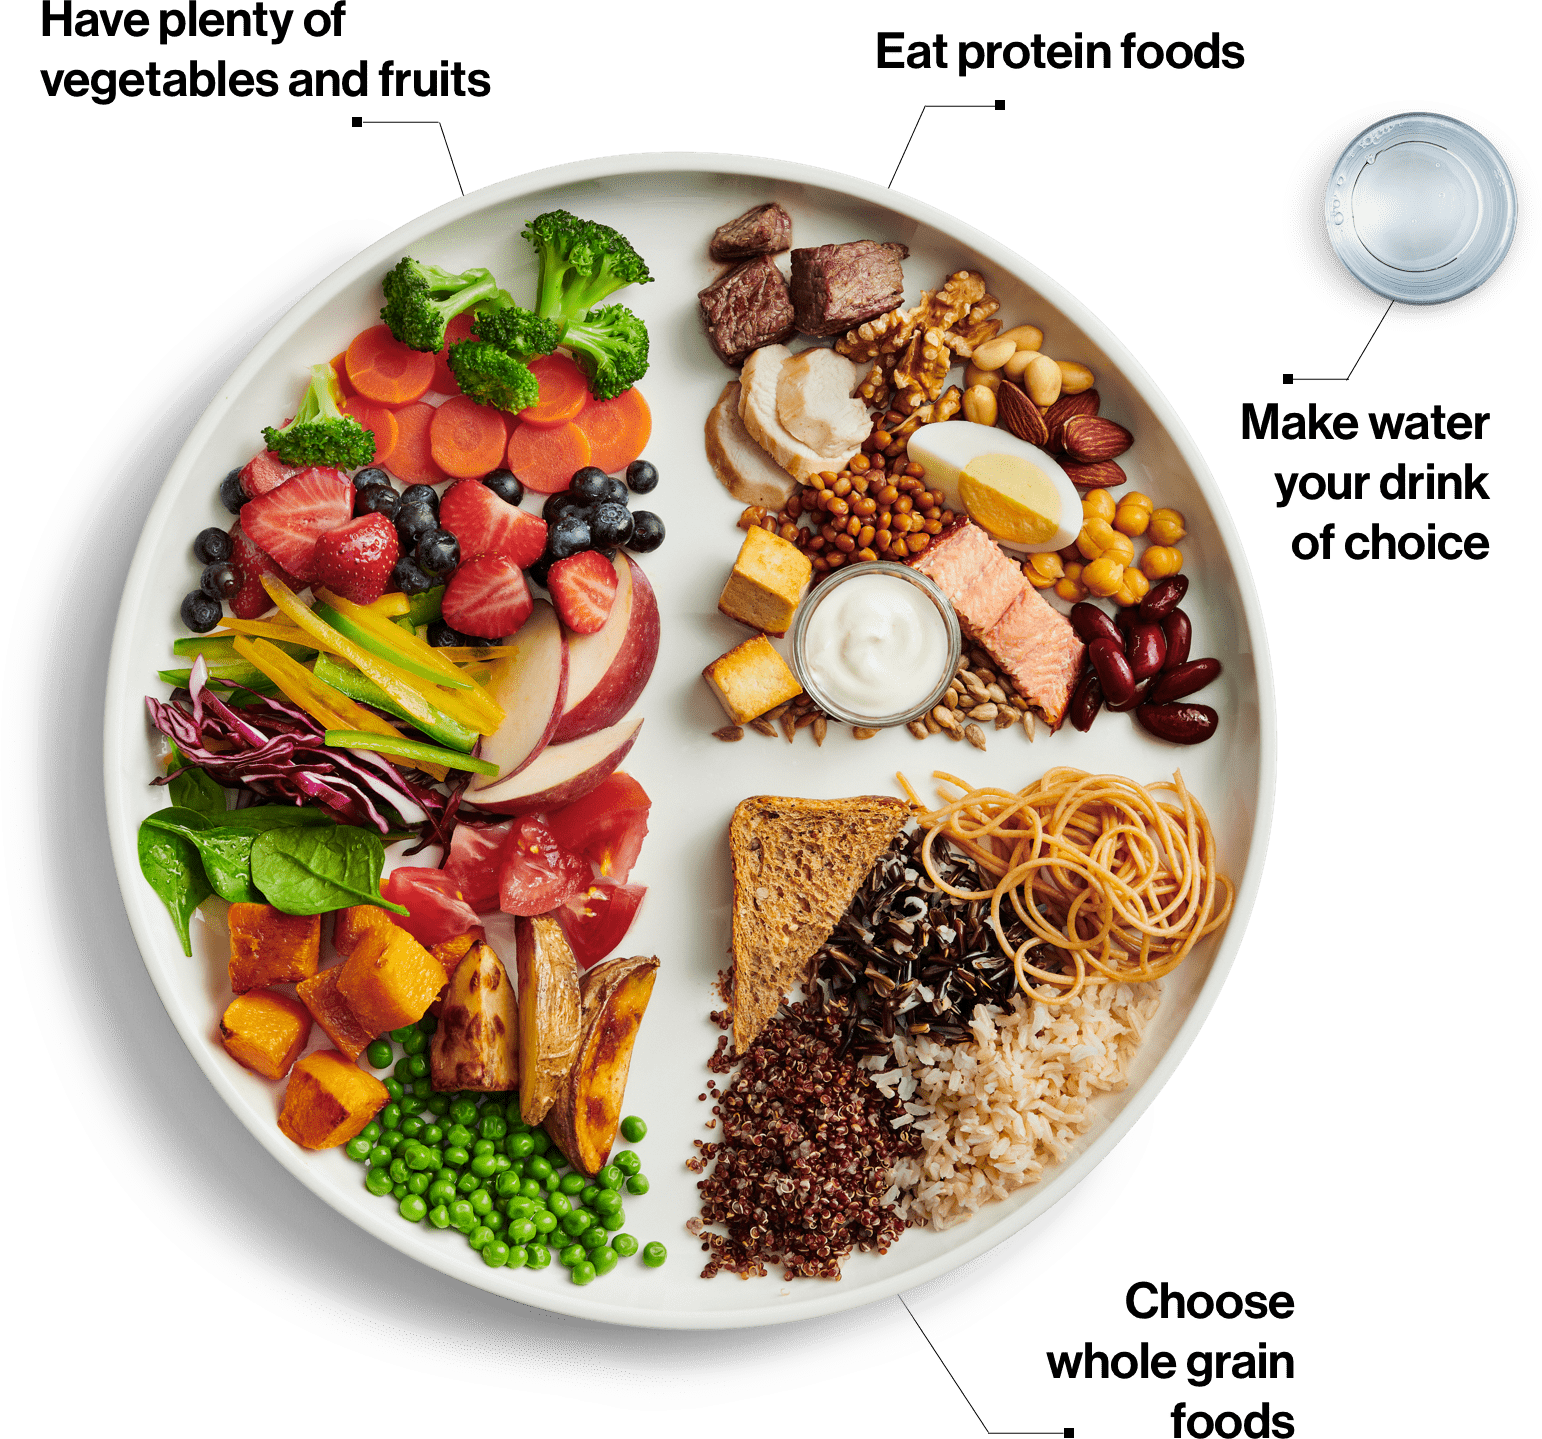 Healthy plate from the 2019 Canada food guide